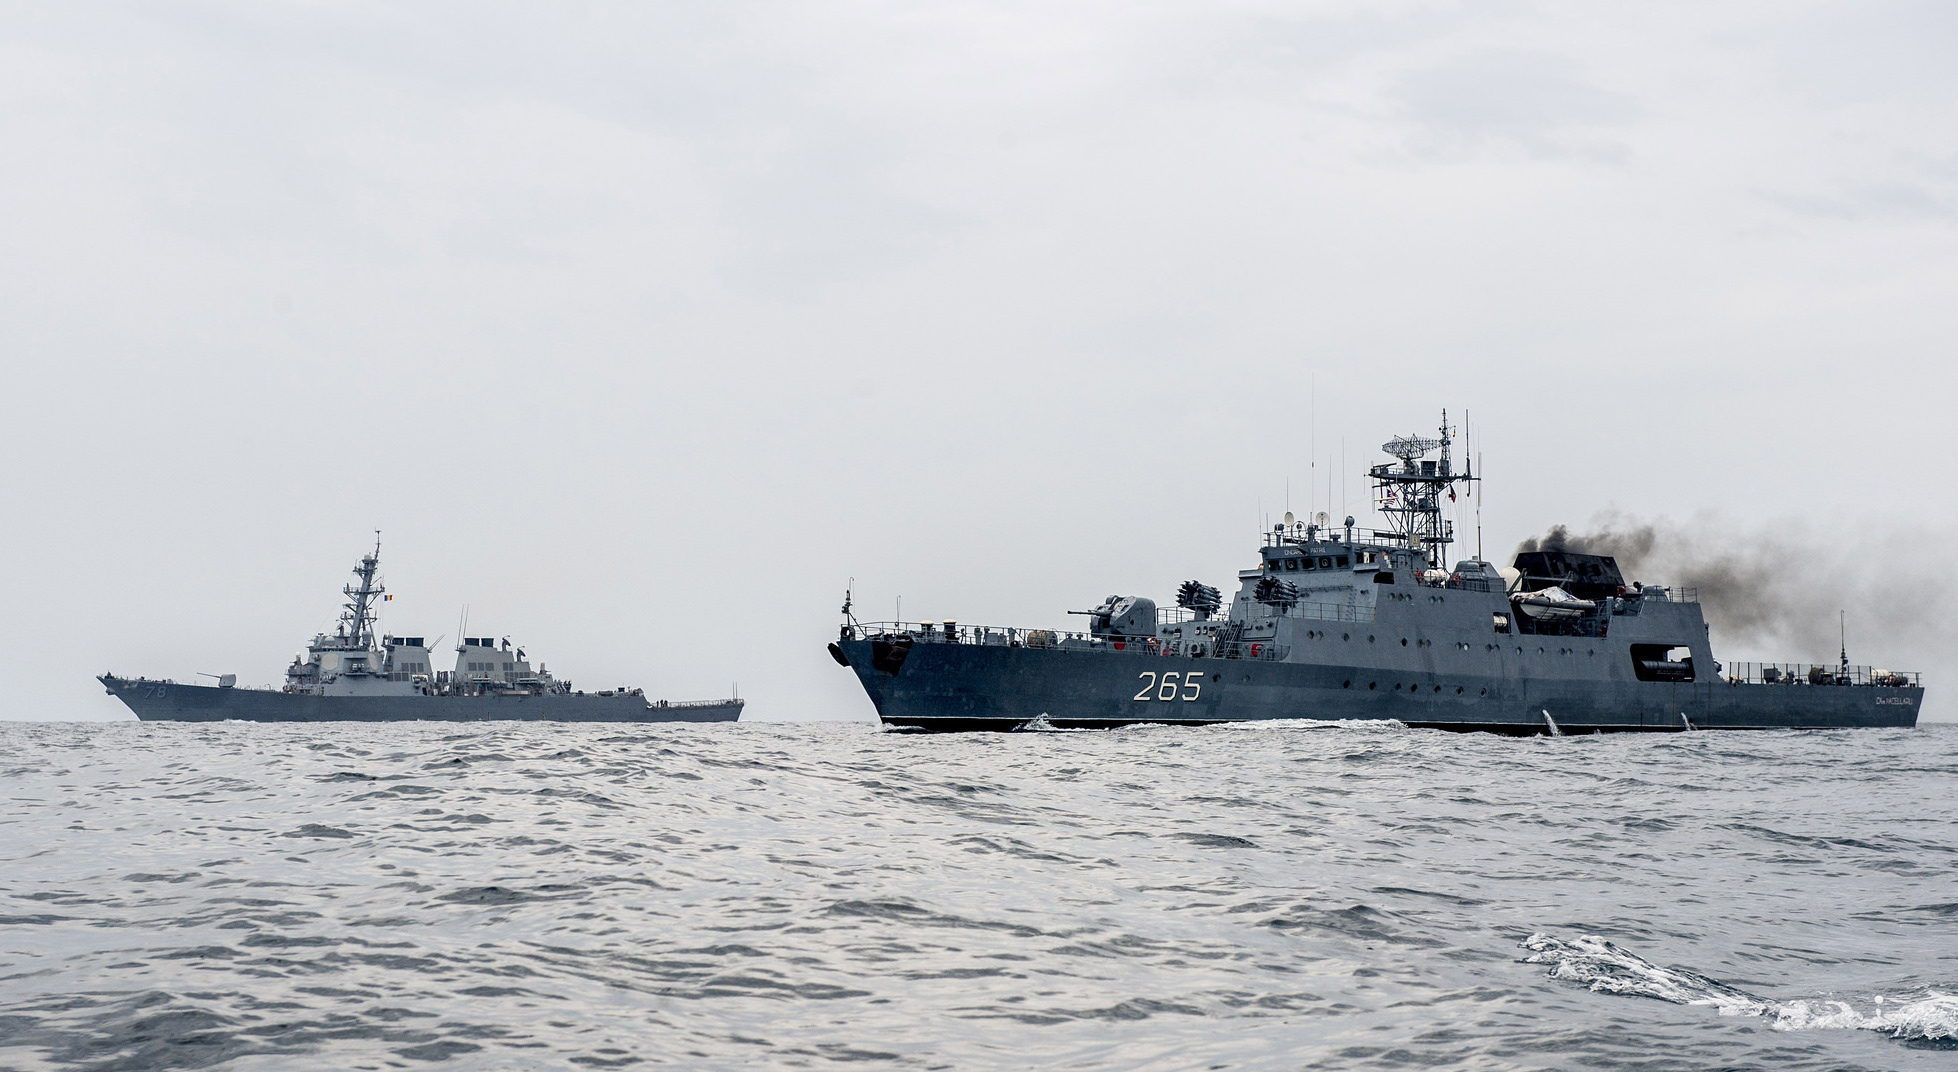 USS Porter (DDG-78), left, and the Romanian naval ship ROS Marcellariu (265), right, transit through the Black Sea during a passing exercise on July 14, 2015. US Navy Photo